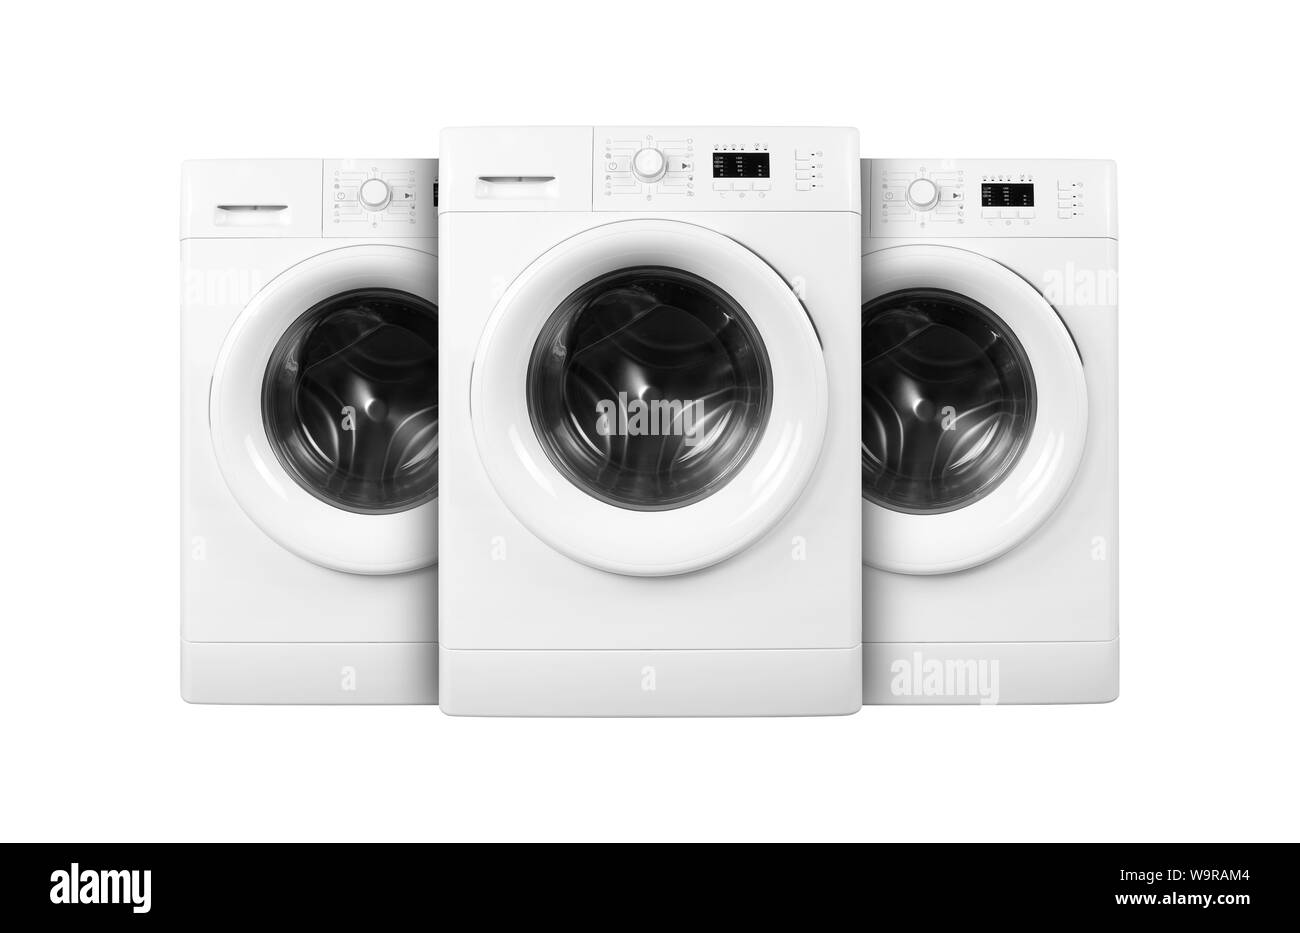 Major appliance - Front view three washing machine on a white background Stock Photo